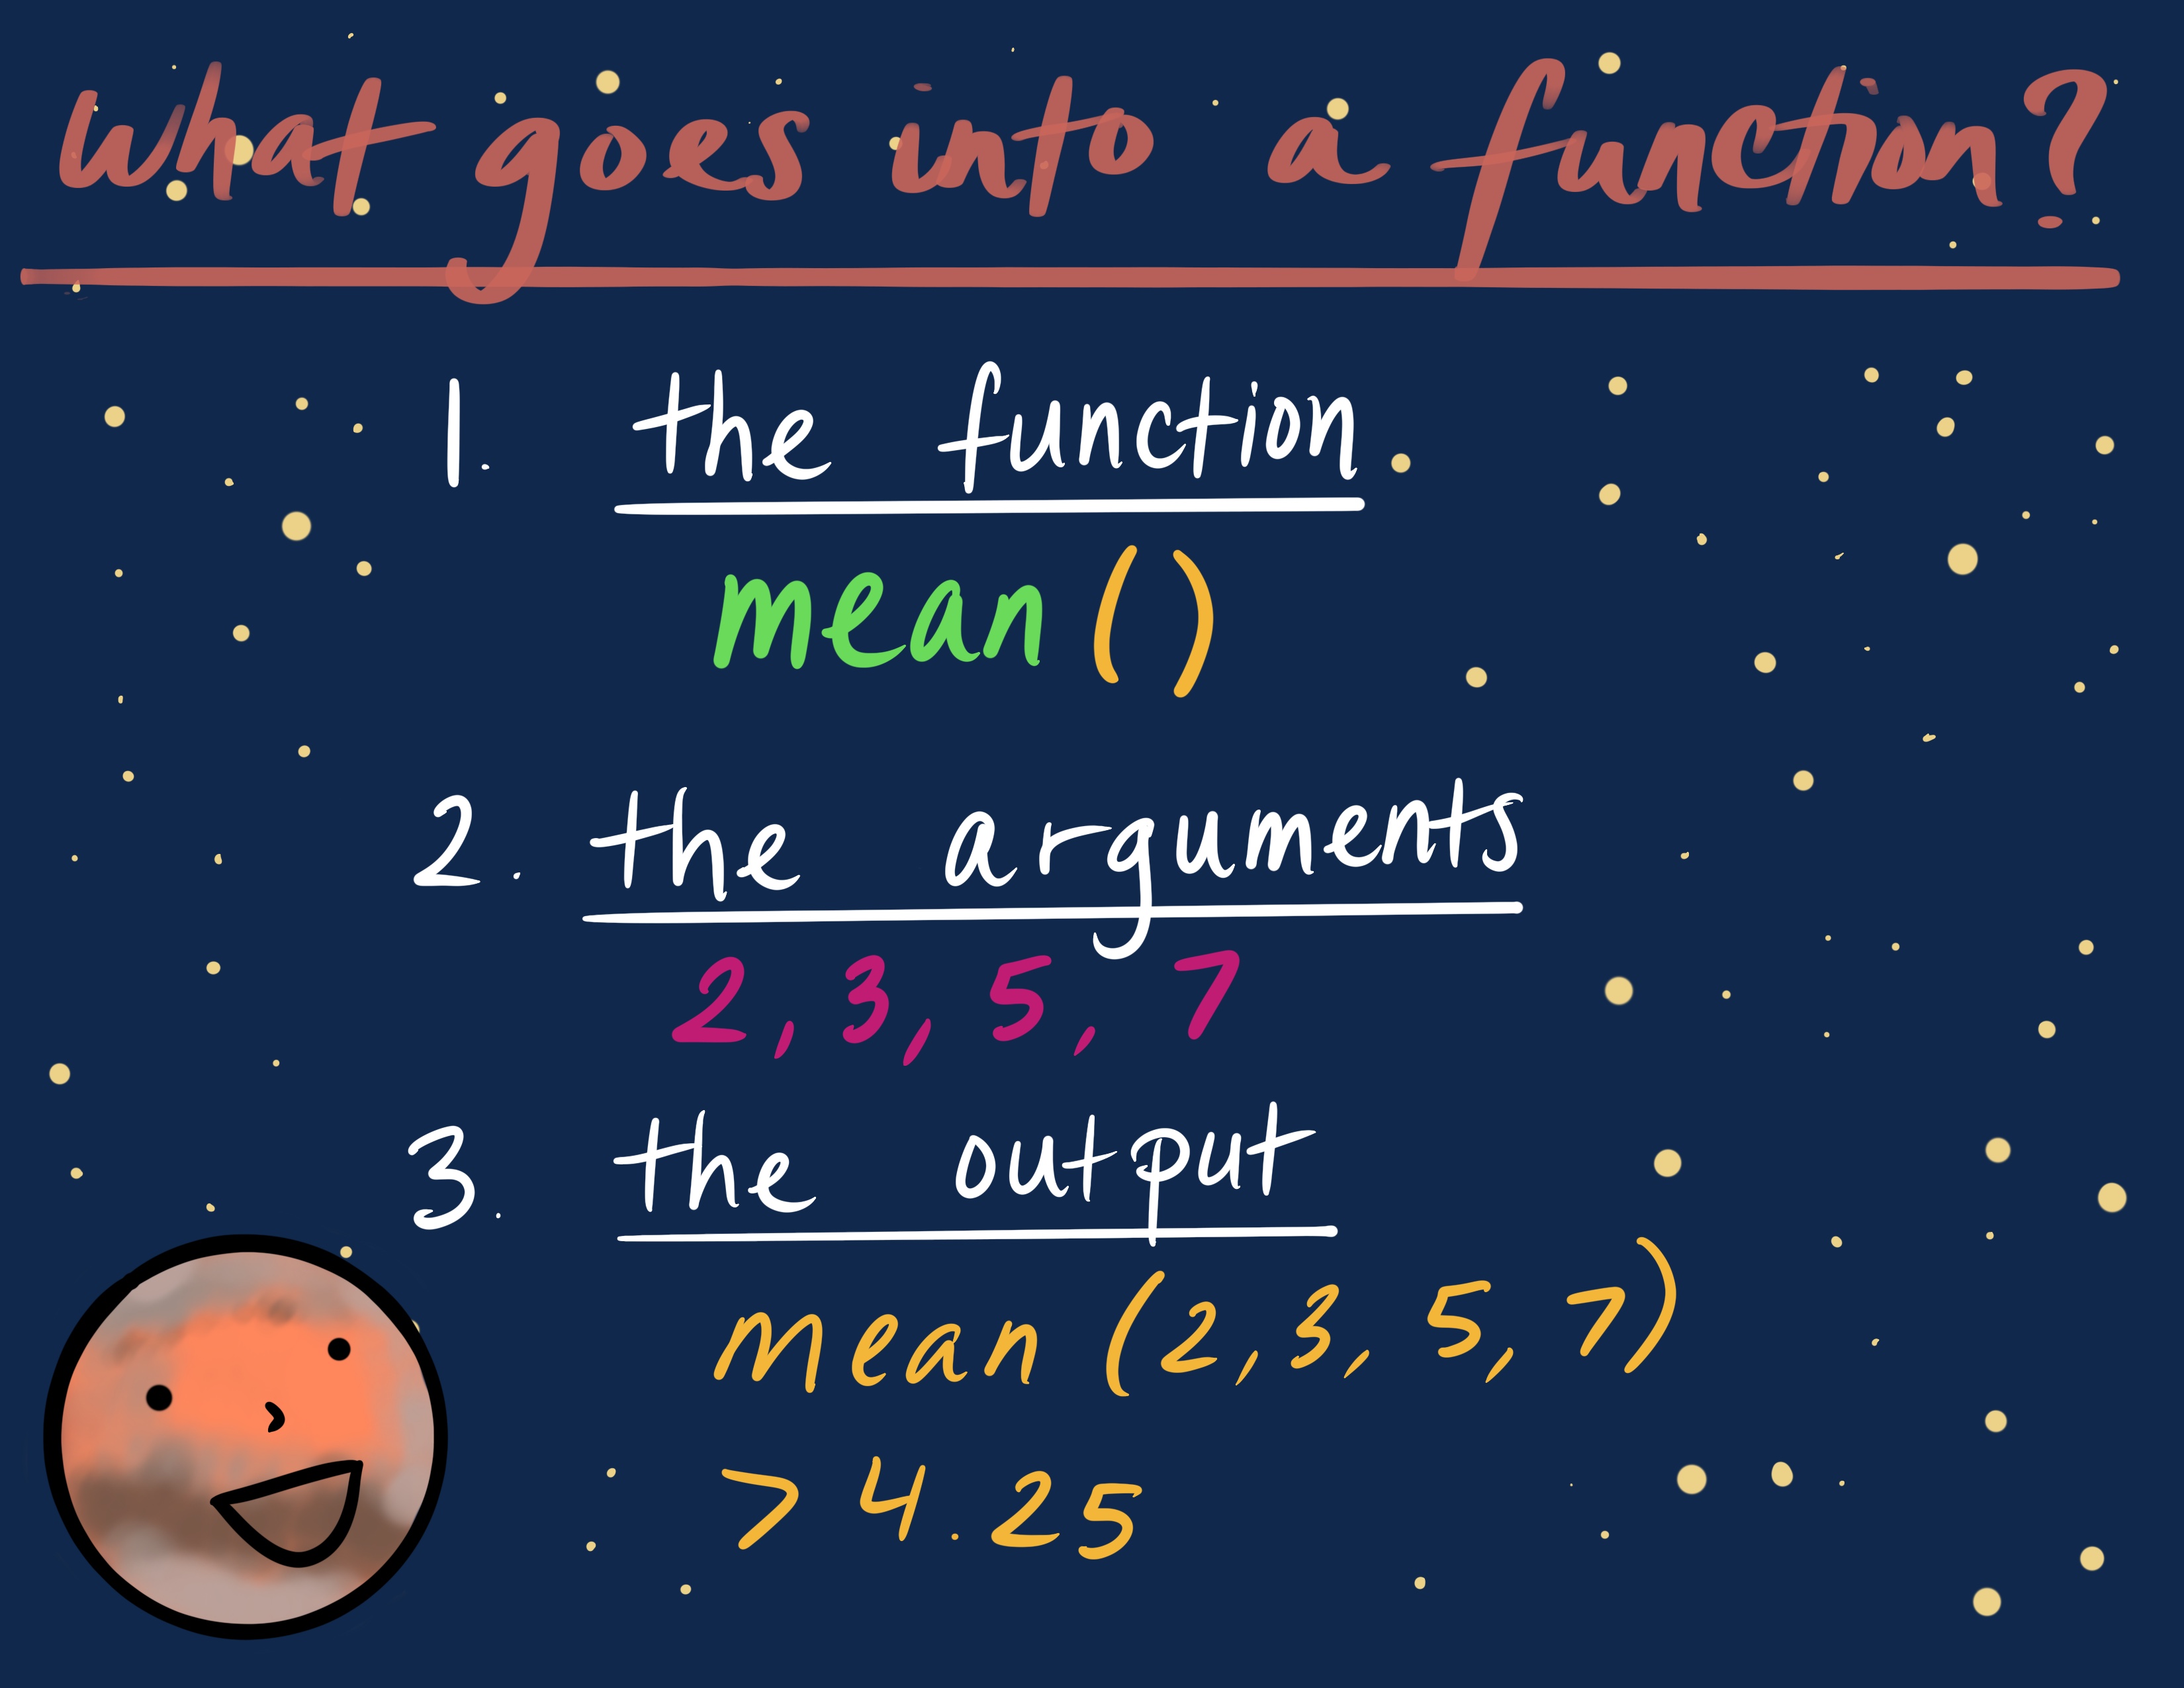 Jupiter explains that using a function takes three steps: 1) the function, 2) the arguments, then 3) the output.